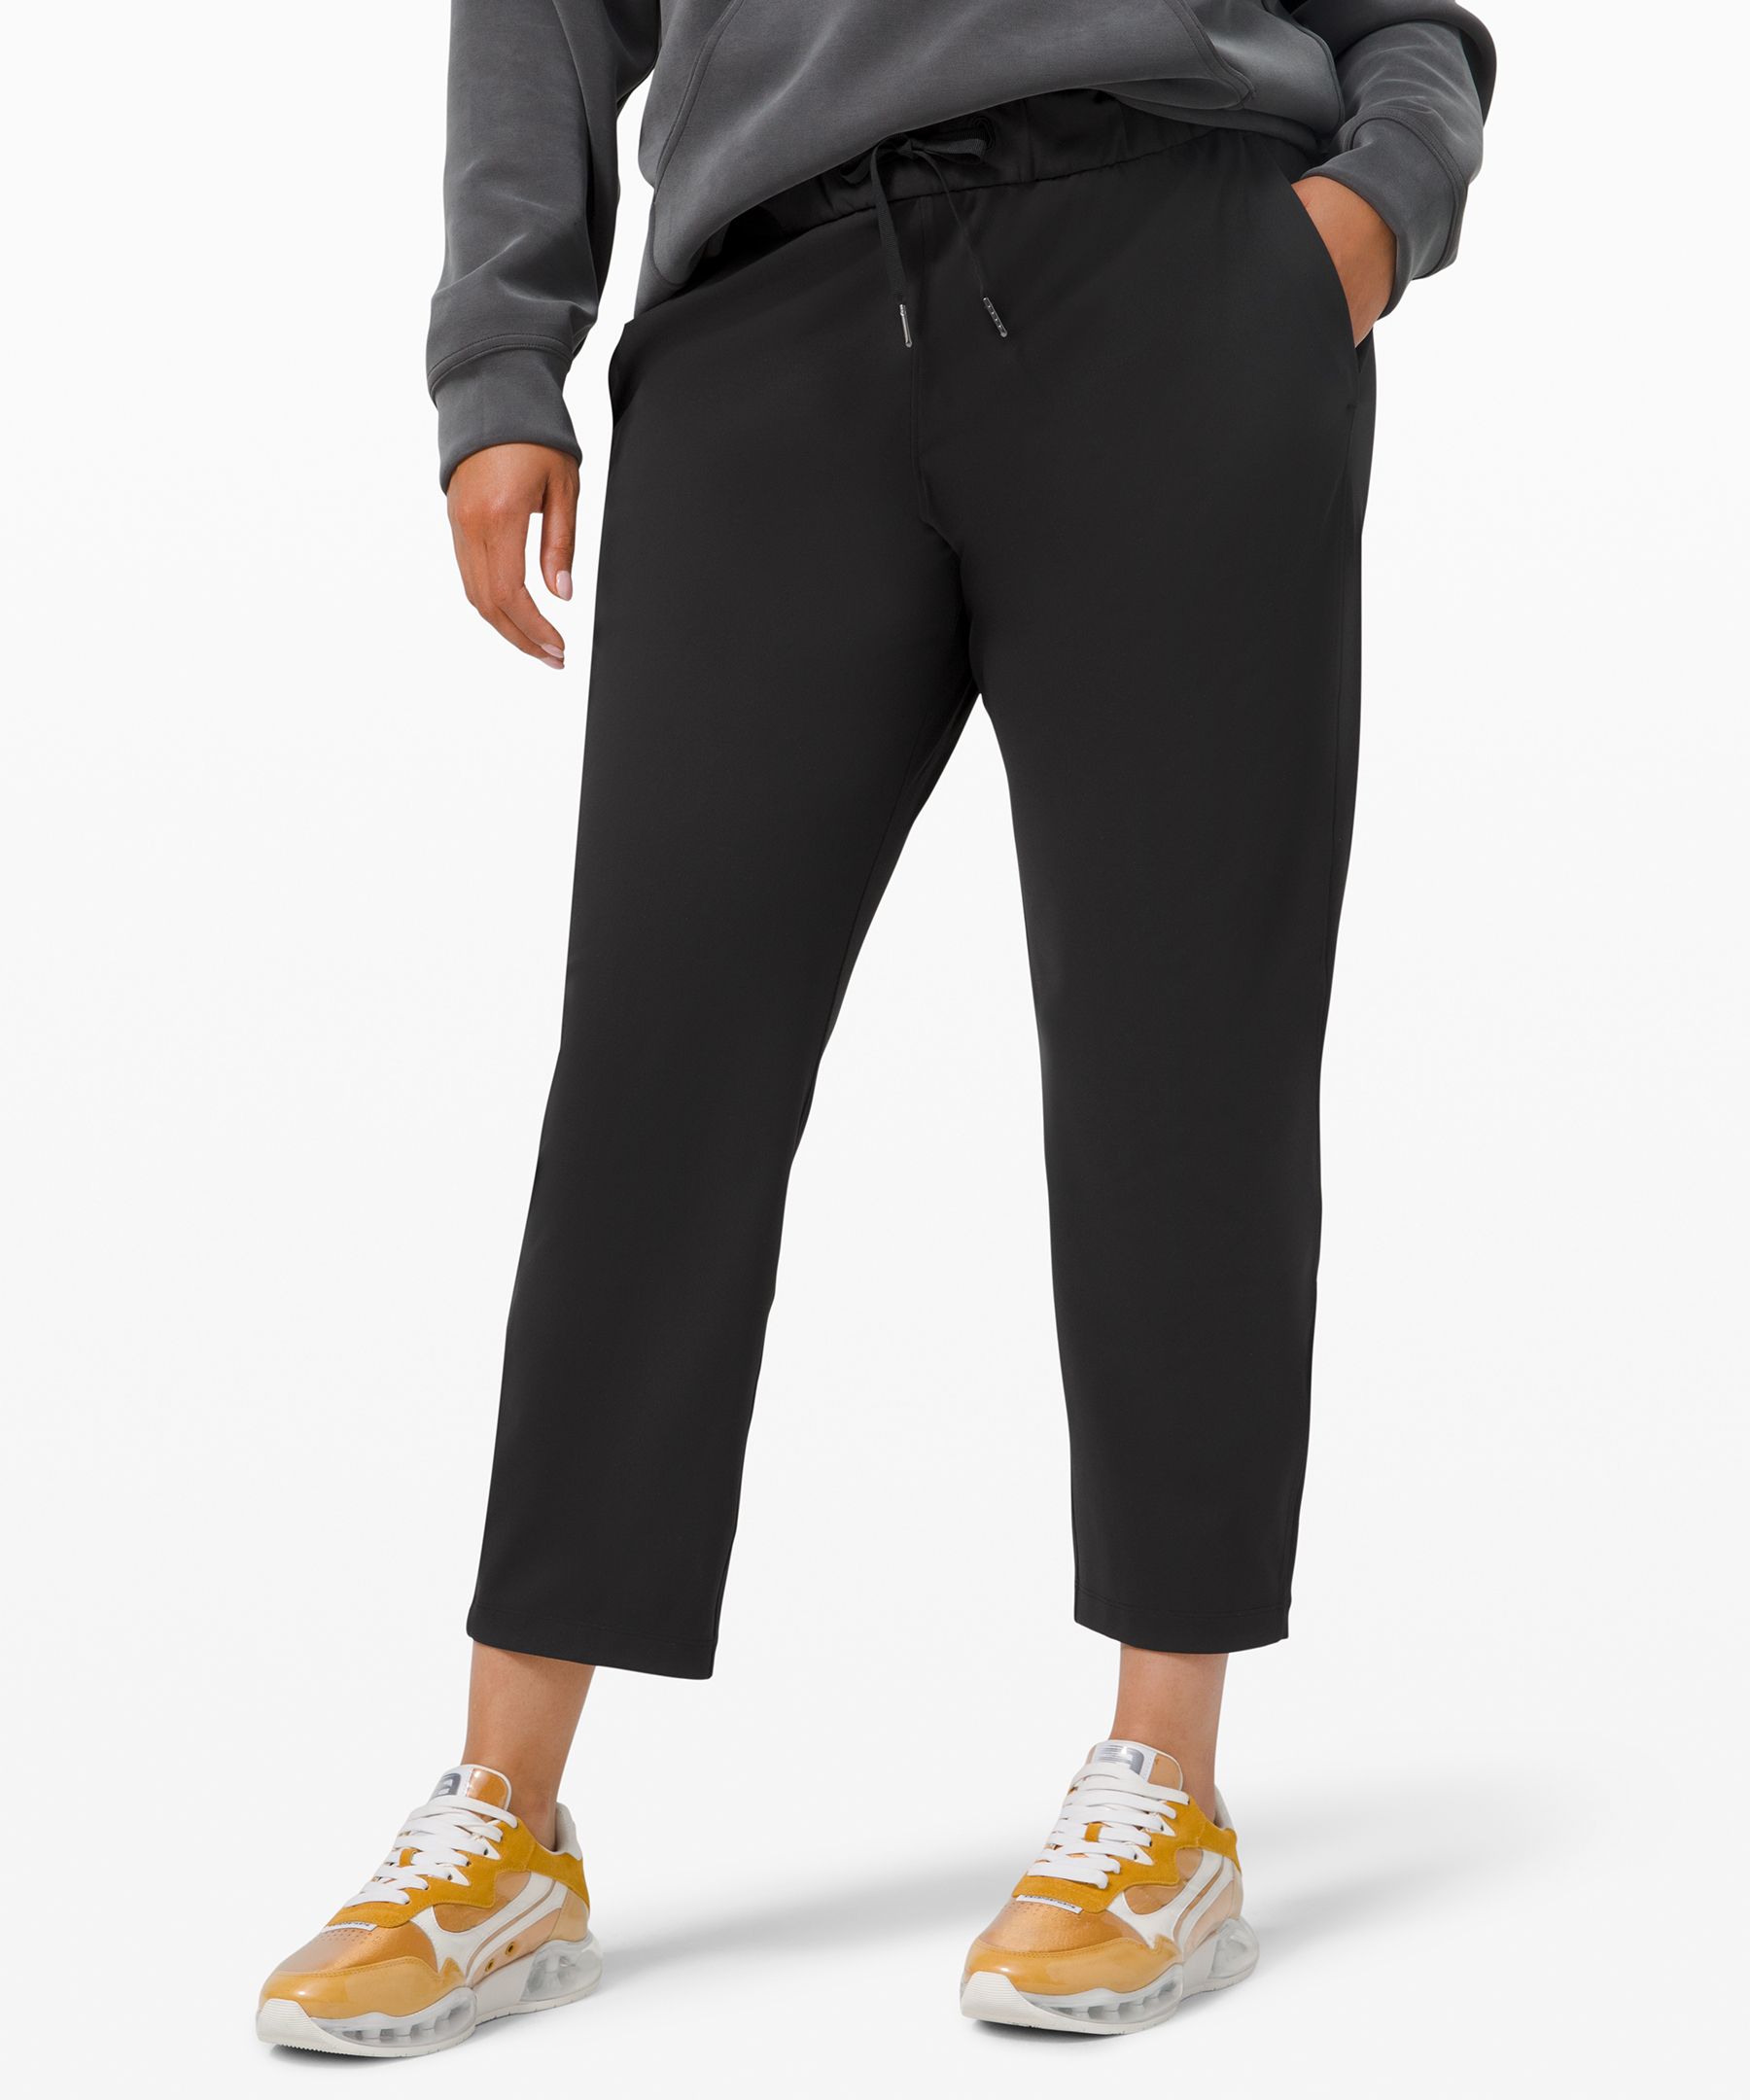 Lululemon On The Fly 7/8 Pant 27" In Black